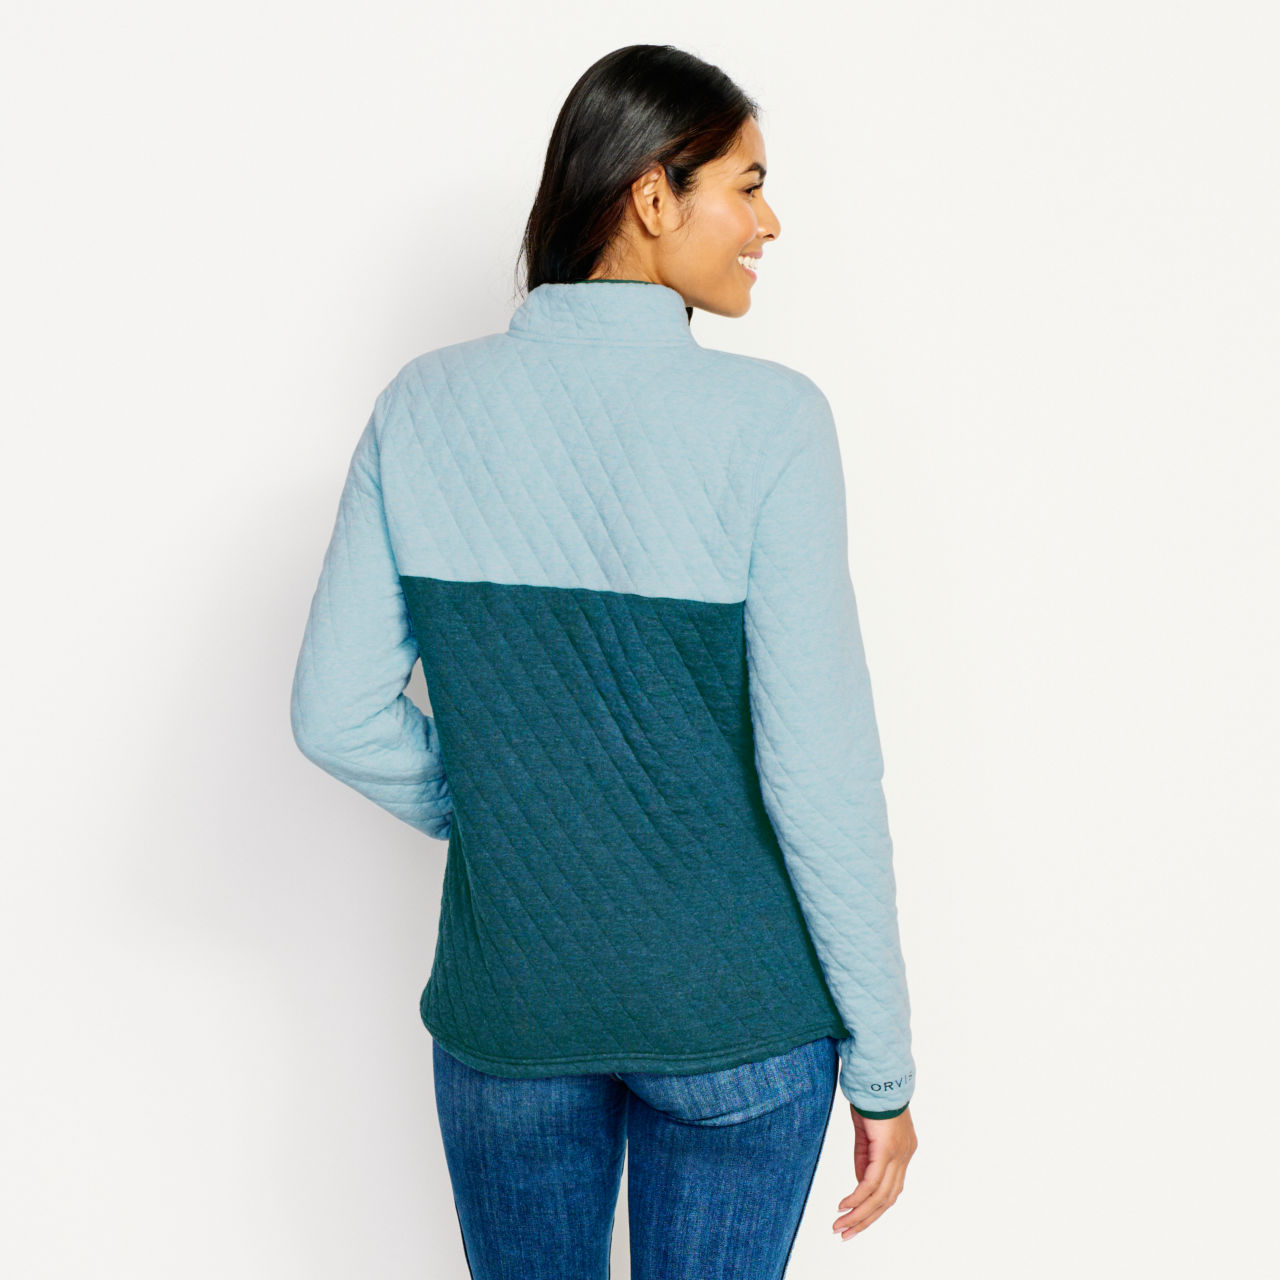 Women’s Outdoor Quilted Snap Sweatshirt - MINERAL BLUE COLORBLOCK image number 3